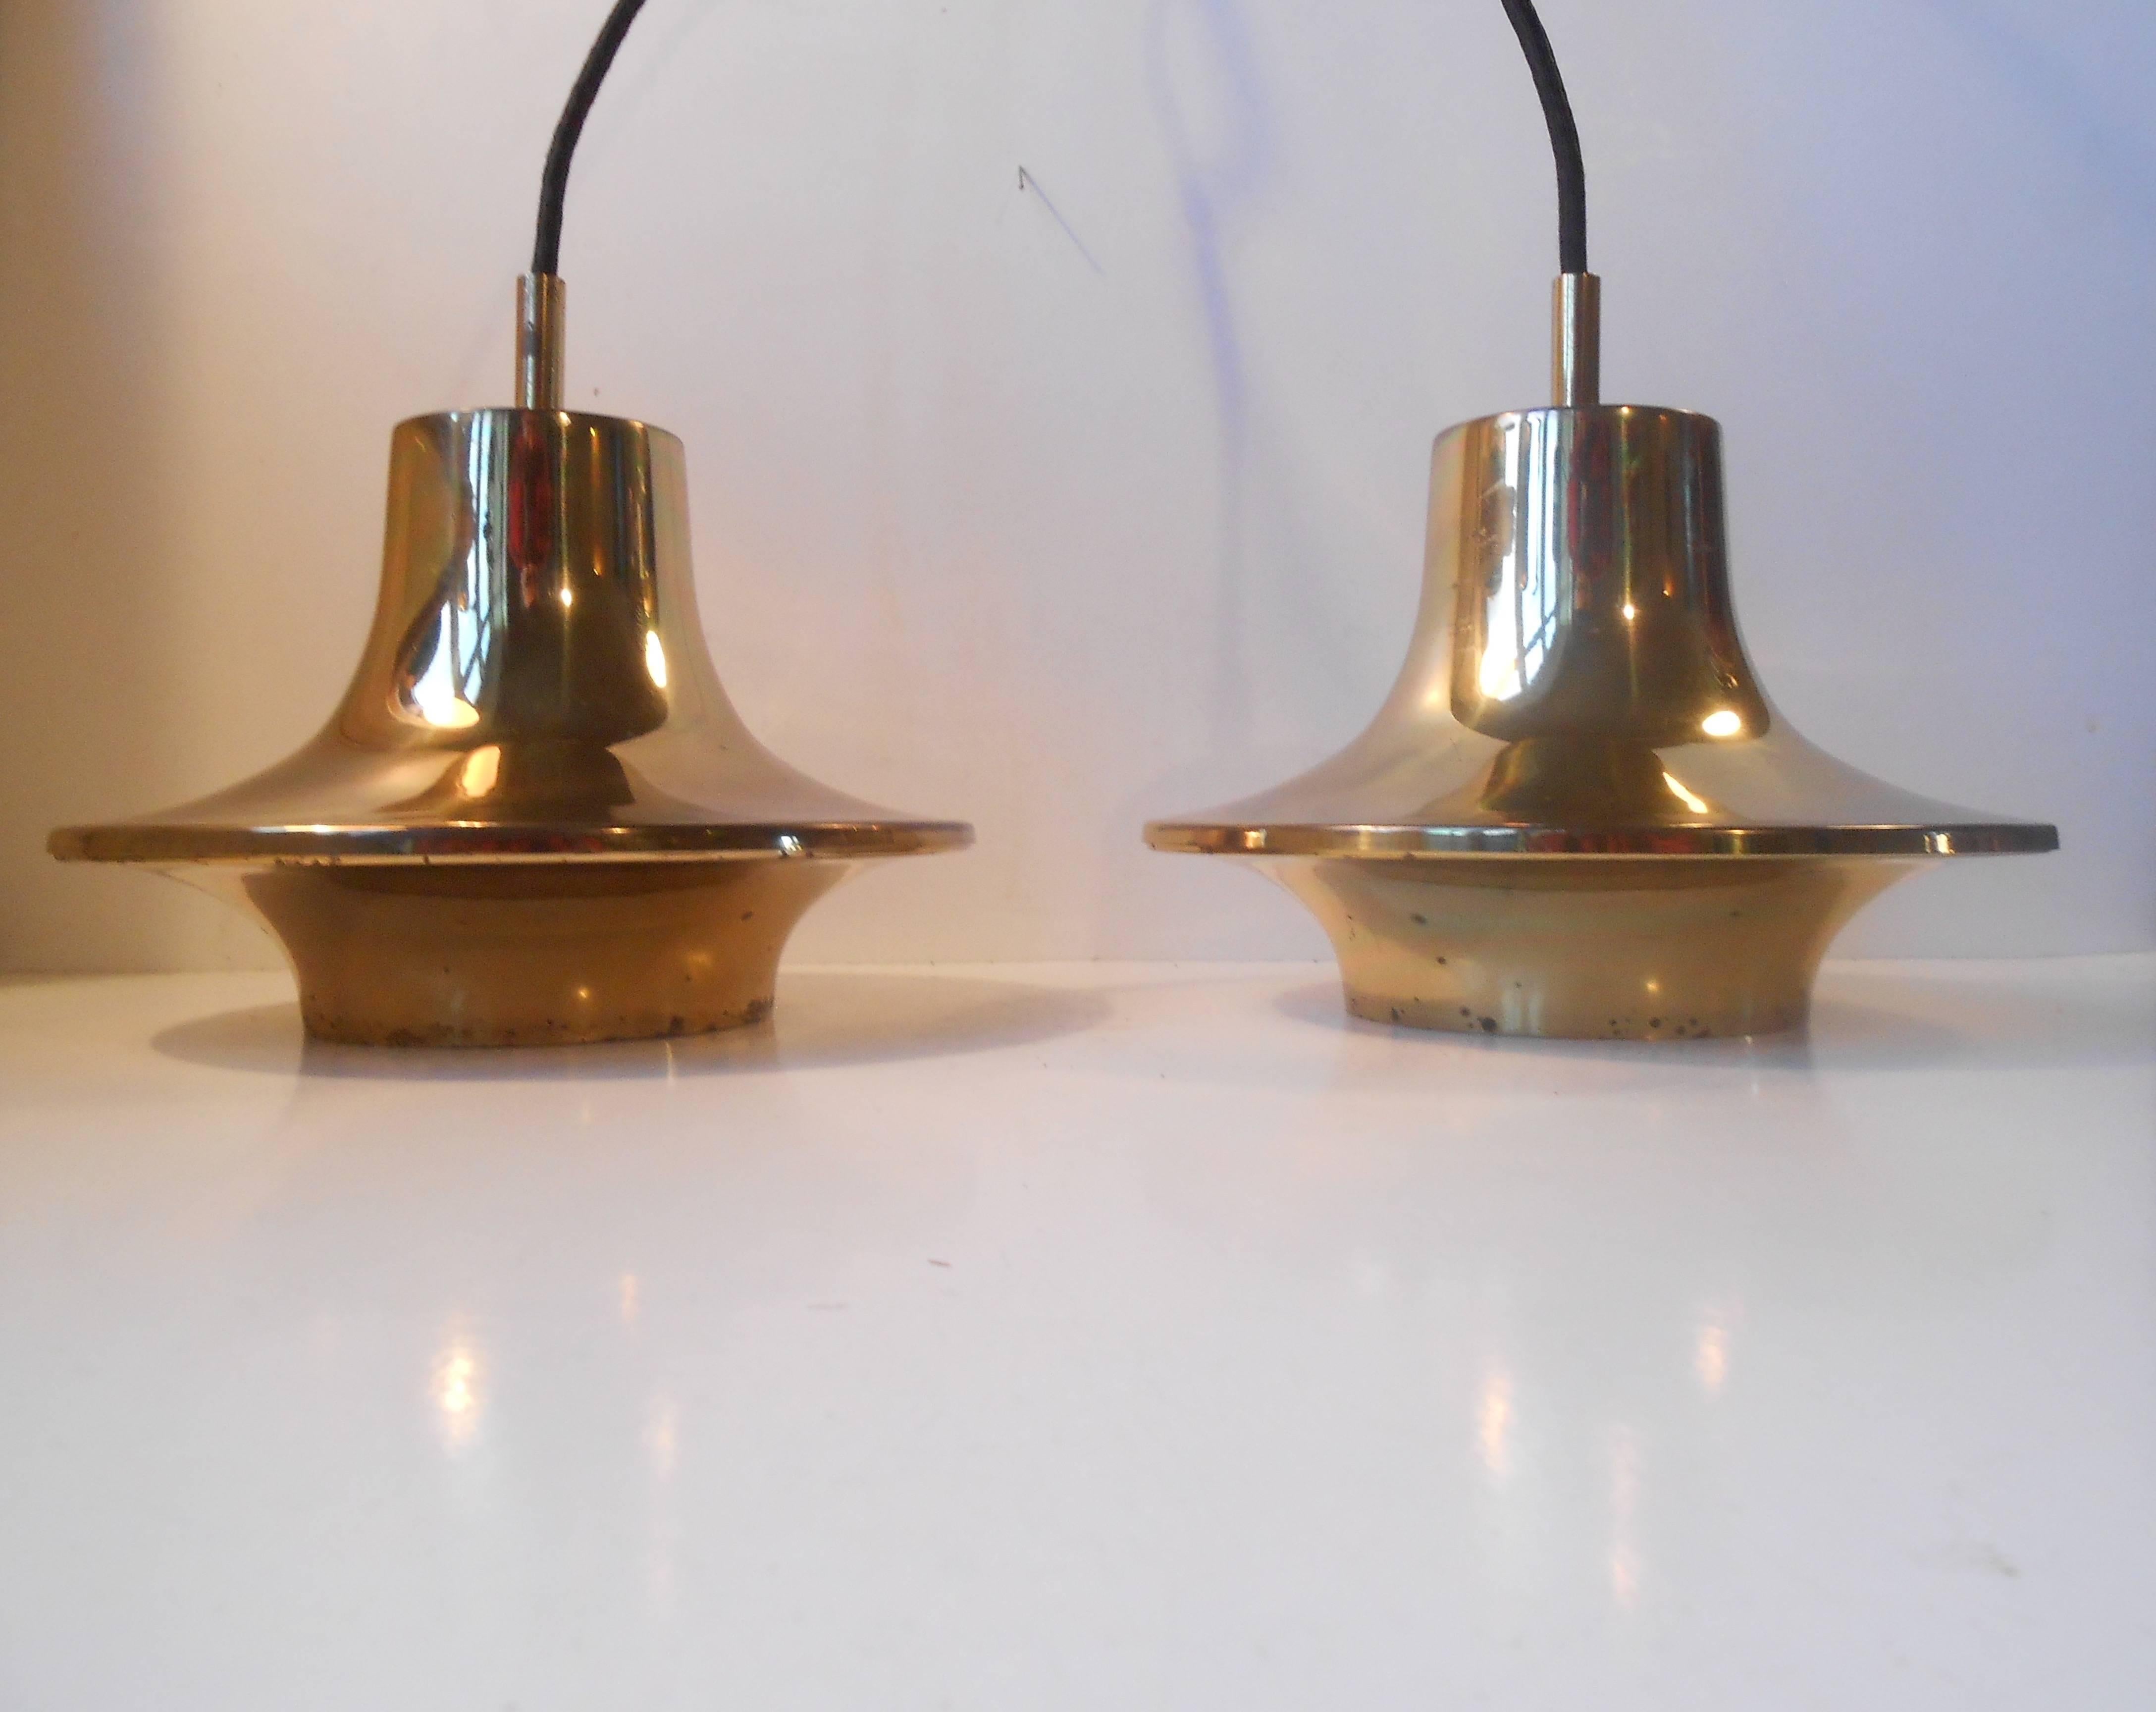 Rare pair of solid pendant ceiling lights by Hans-Agne Jakobsson for Markaryd Sweden, 1960s. Distinct saucer shapes with patina to the brass. Suitable for kitchen, cosy corner lightning, over your mid century desk or sideboard. The price is for the